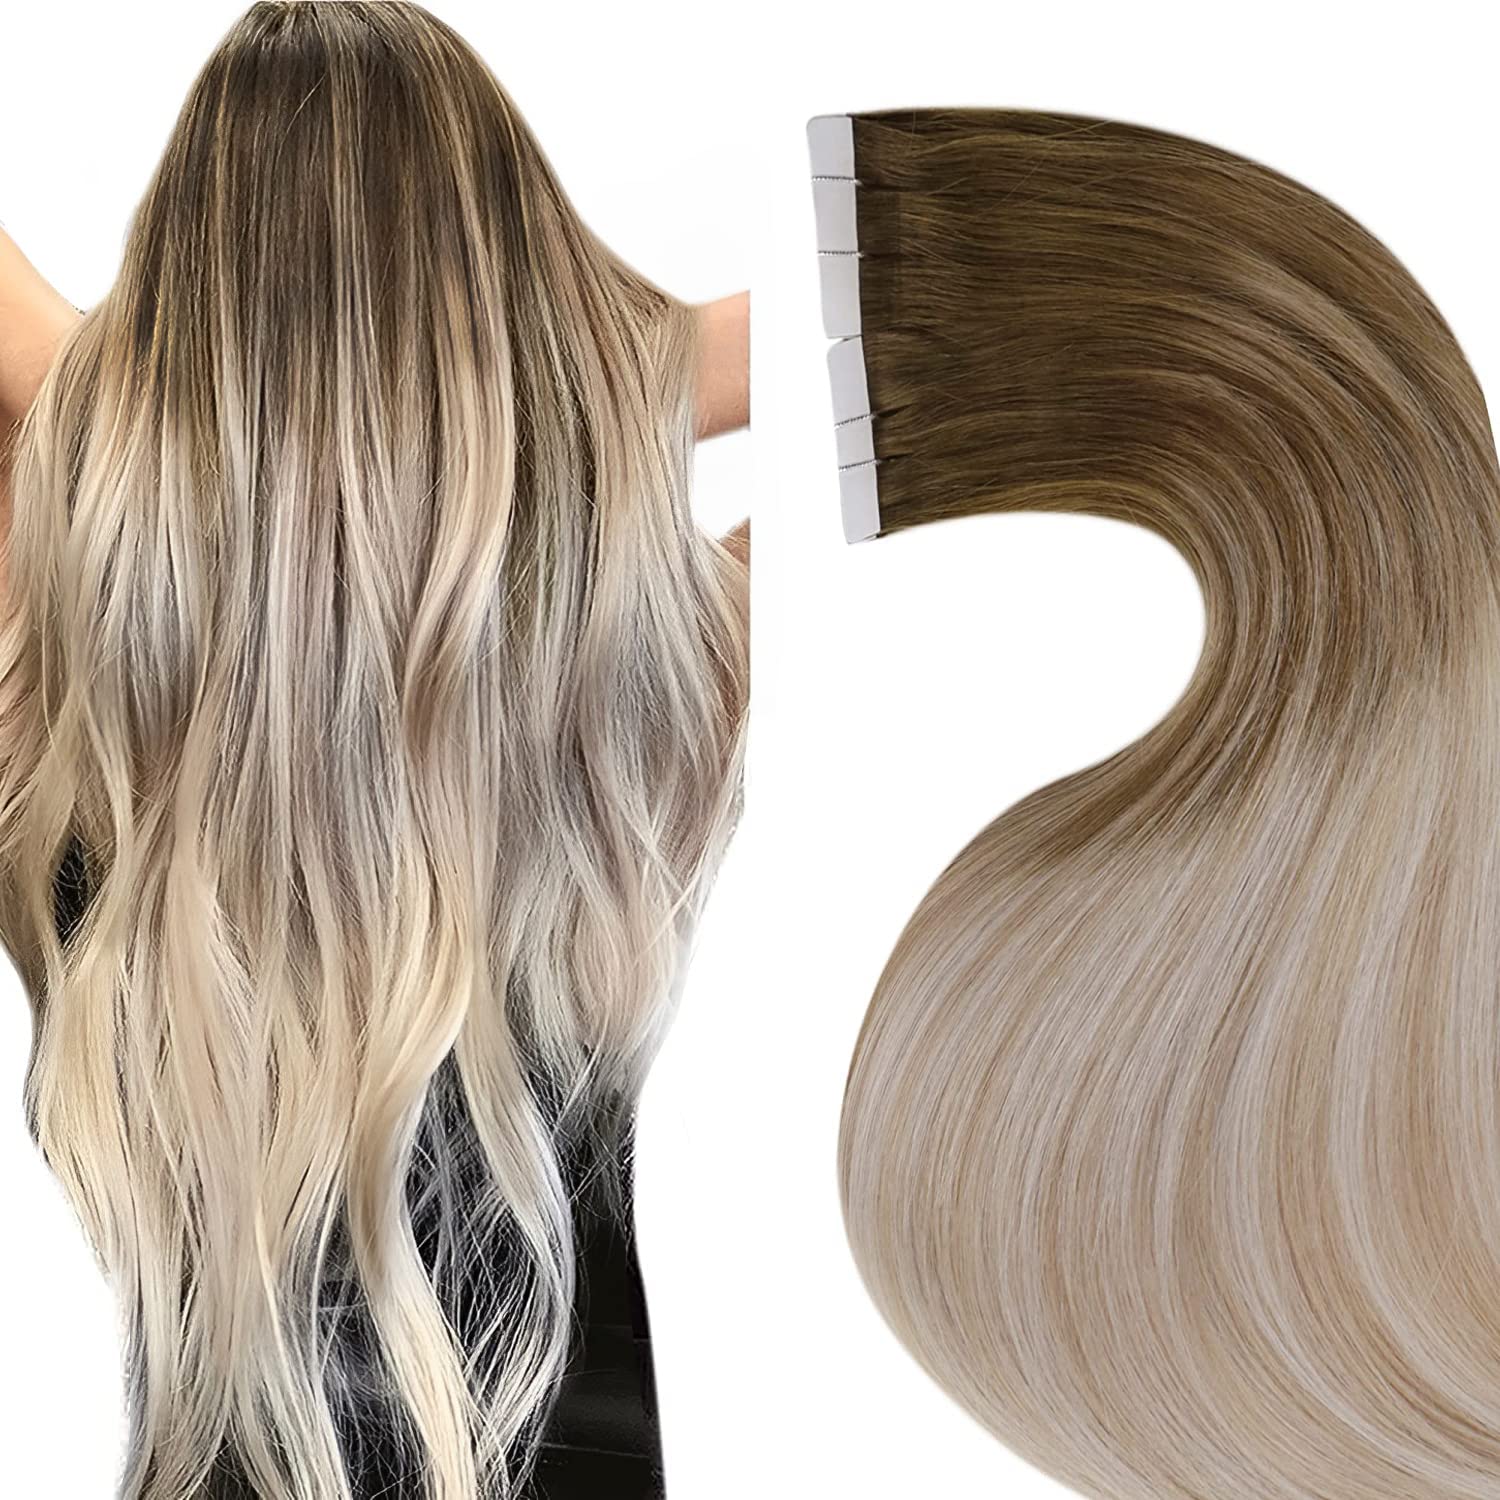 LaaVoo Tape in Hair Extensions Real Human Hair Ombre [...]